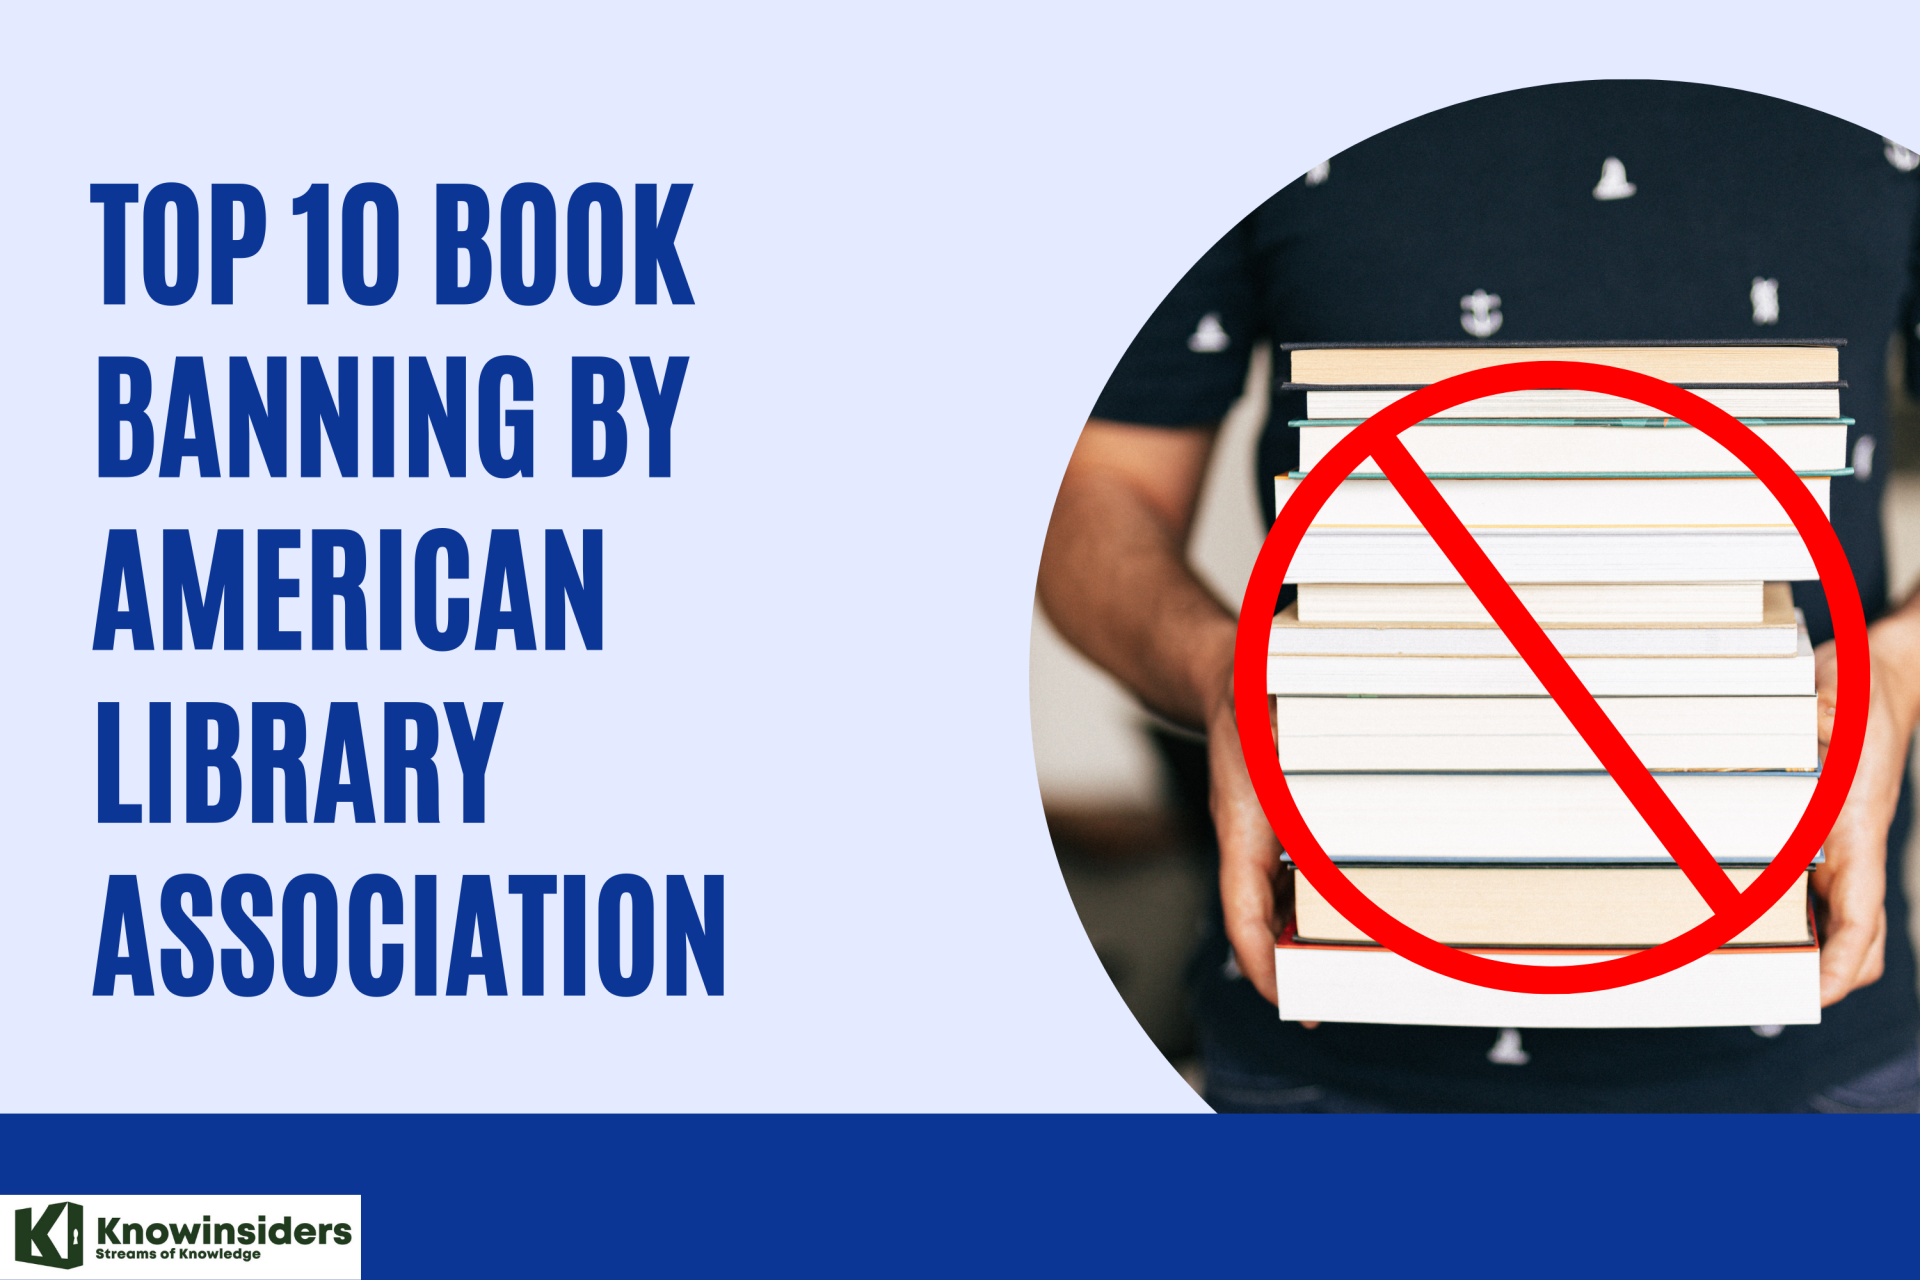 Top 10 Book Banning by American Library Association